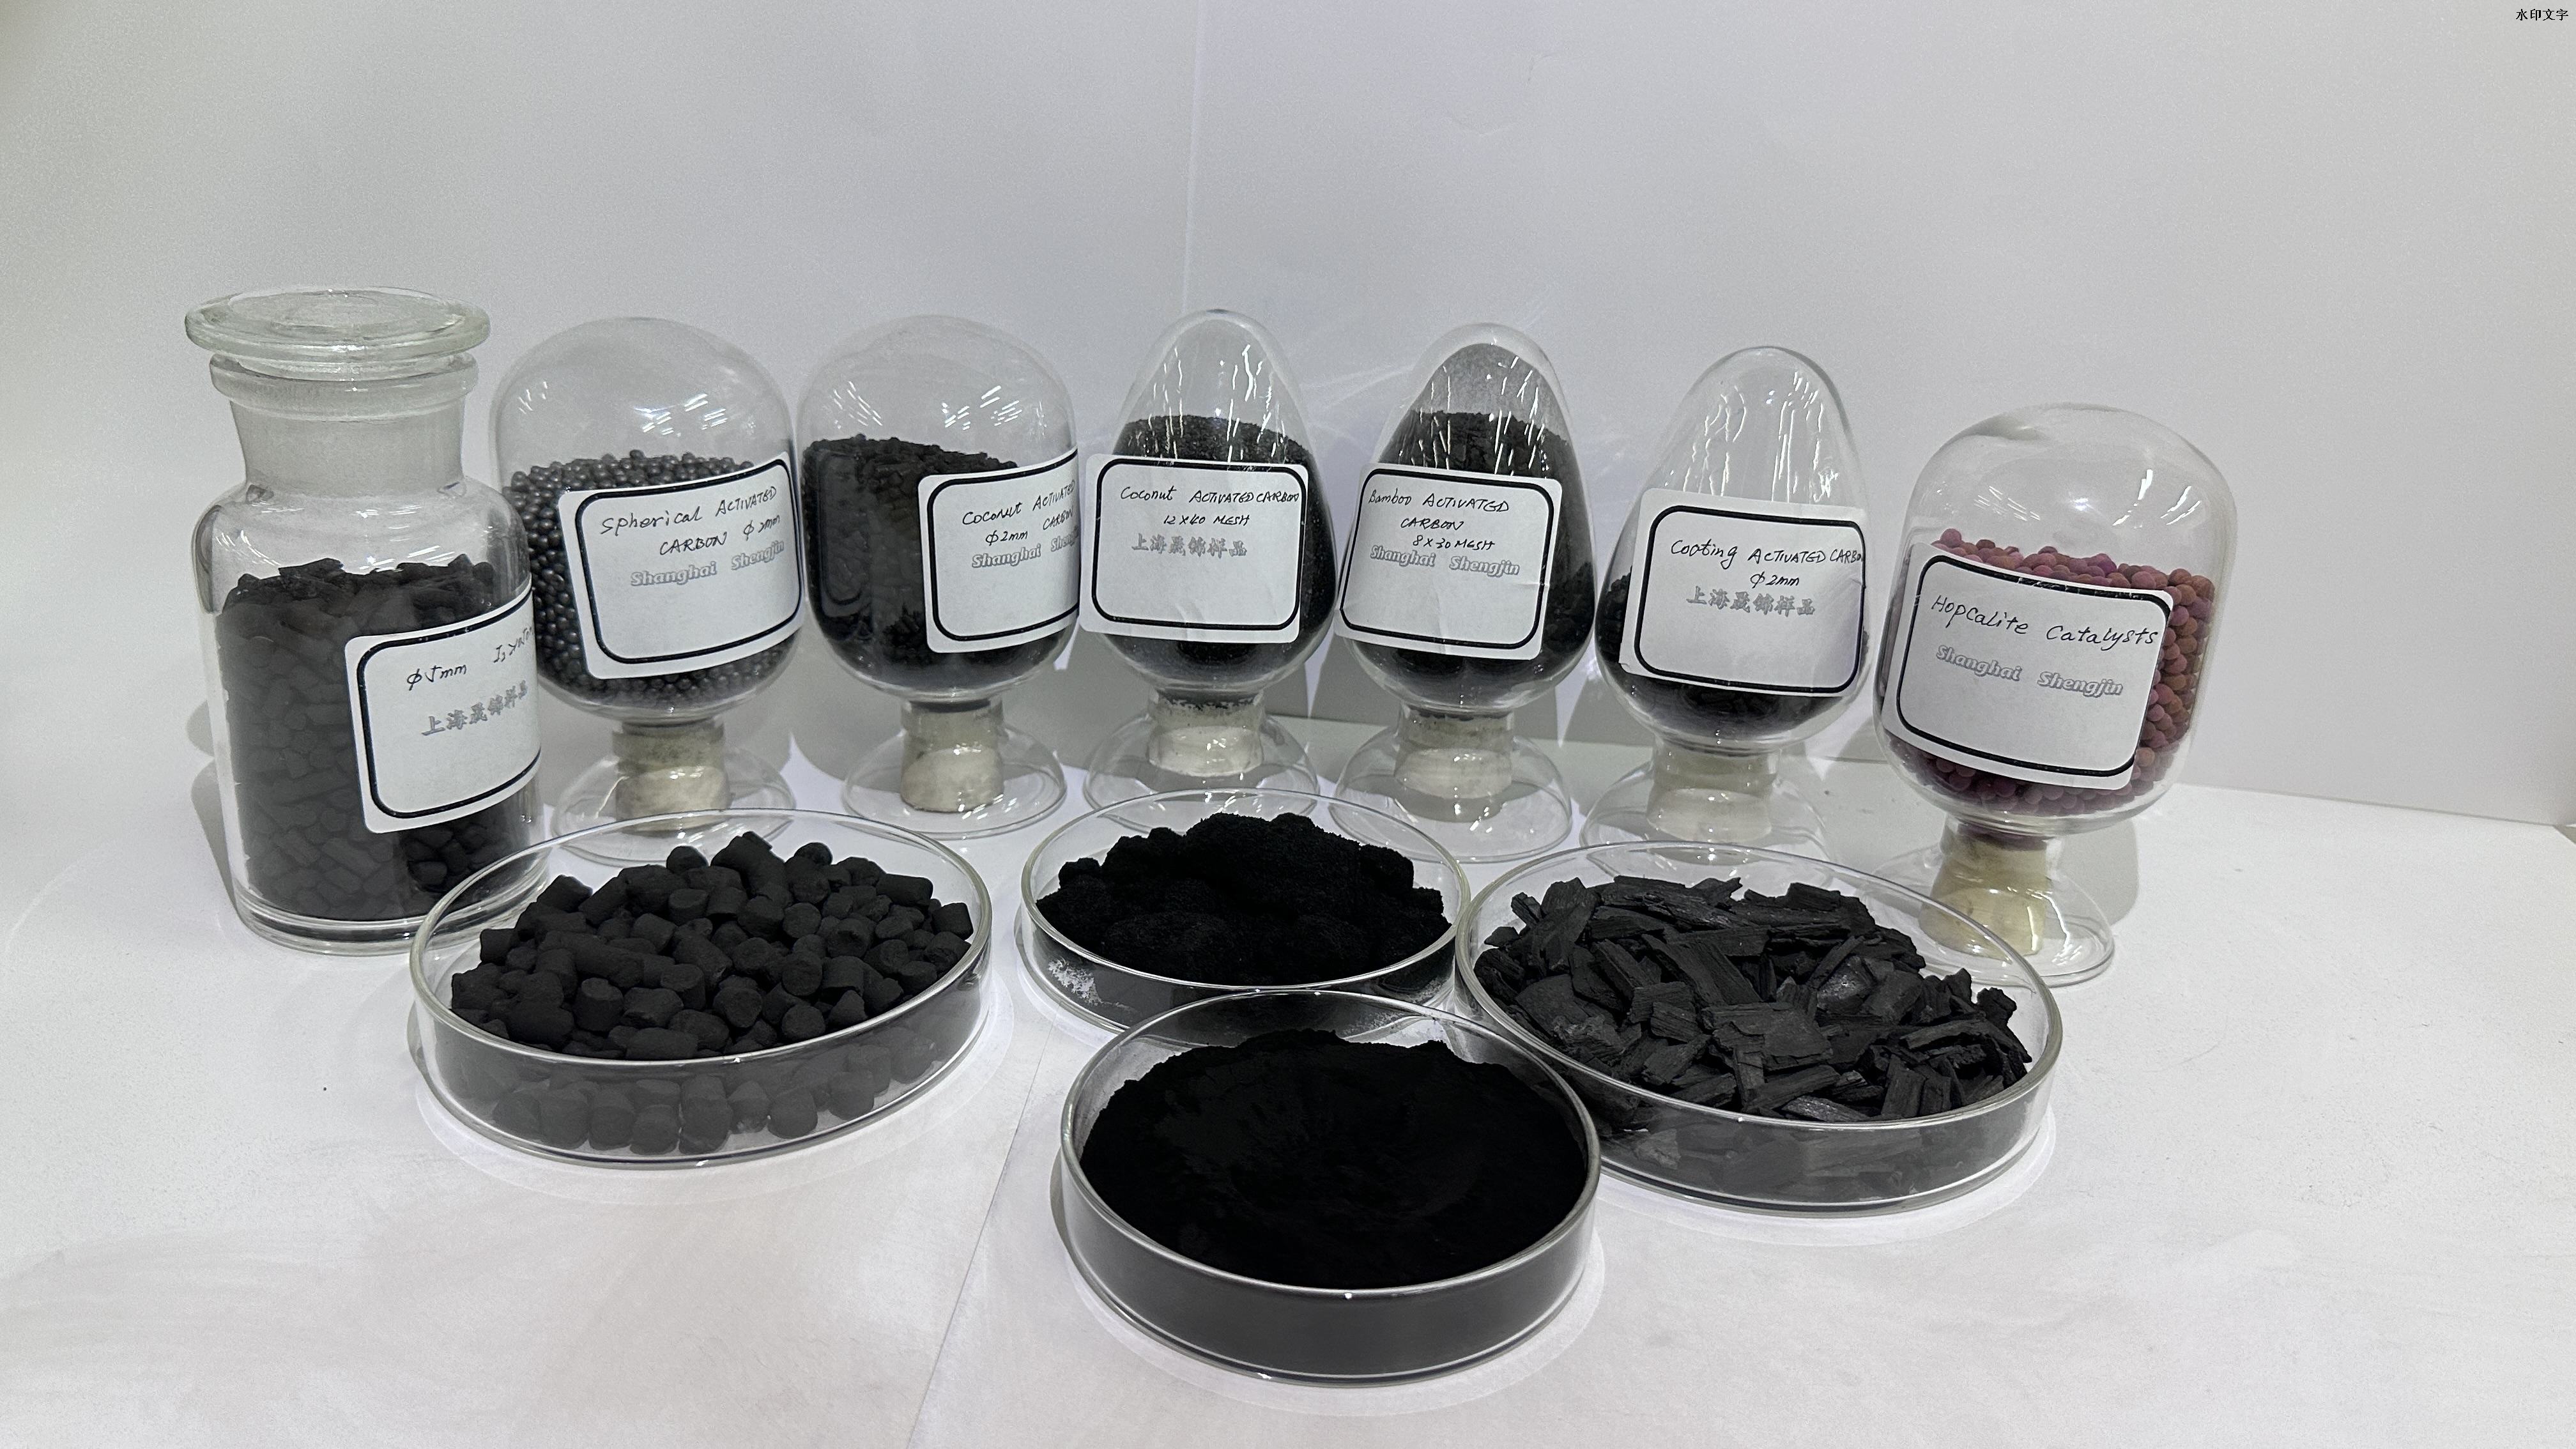 SJ High Purity Granular Activated Carbon Water Treatment Activated Carboon